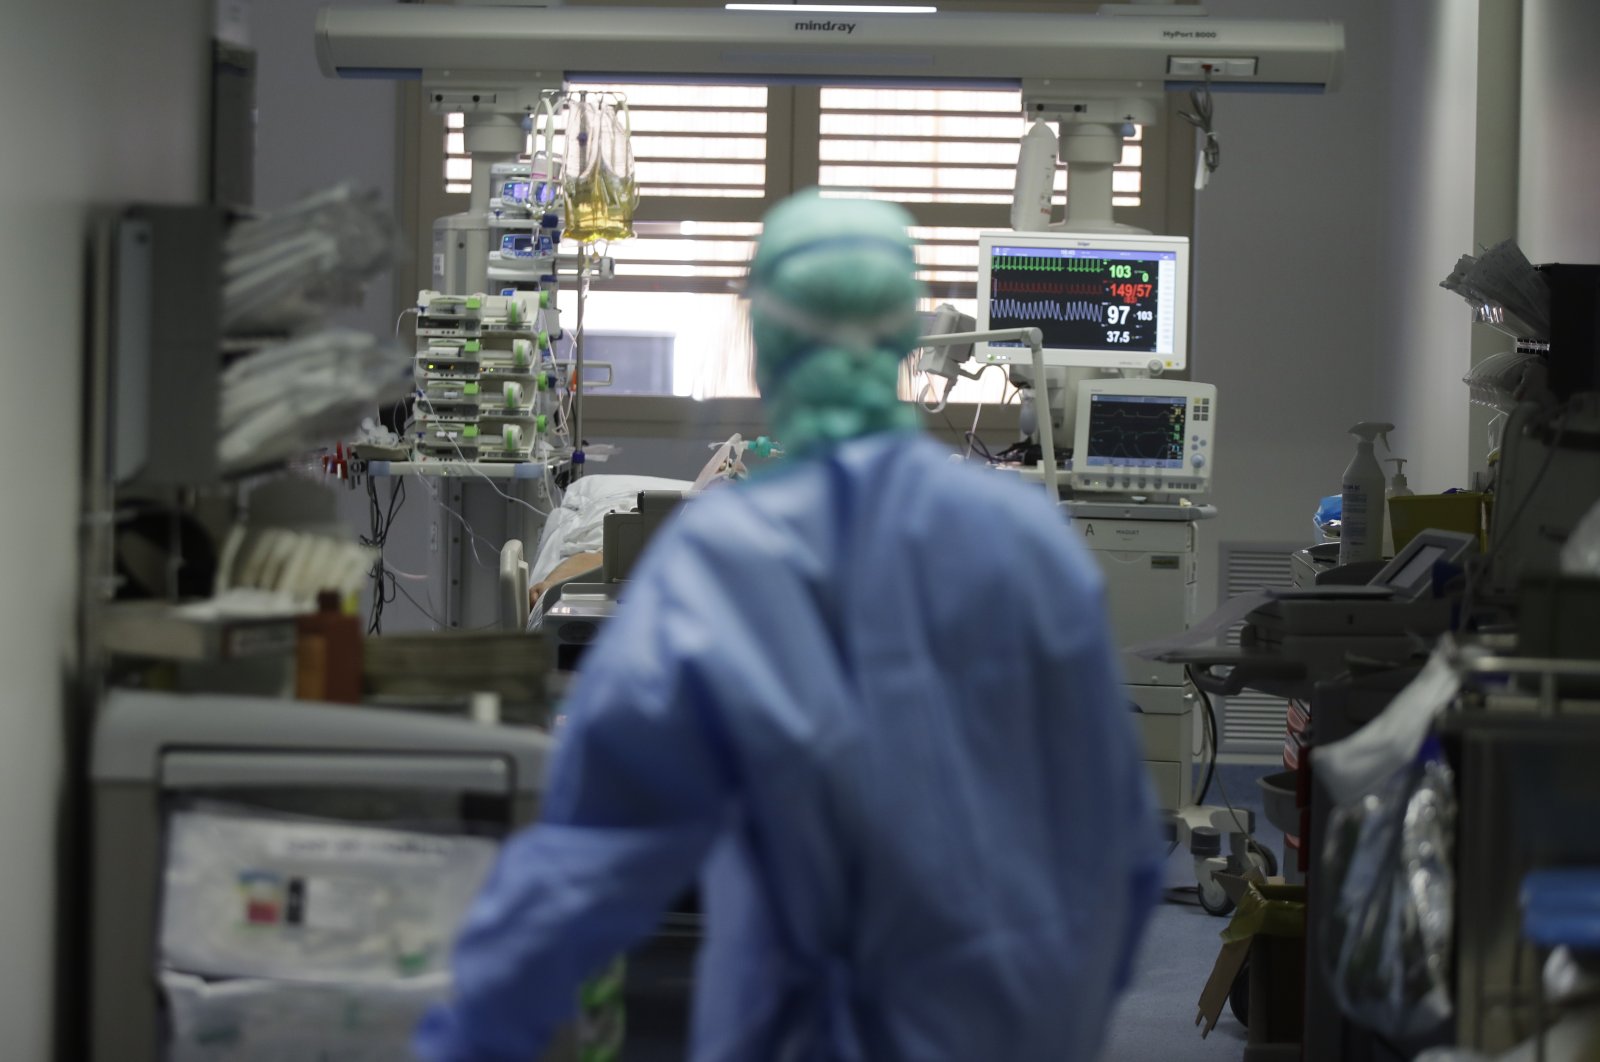 A doctor watches a coronavirus patient under treatment in the intensive care unit of the Brescia hospital, Italy, Monday, March 16, 2020. (AP Photo)